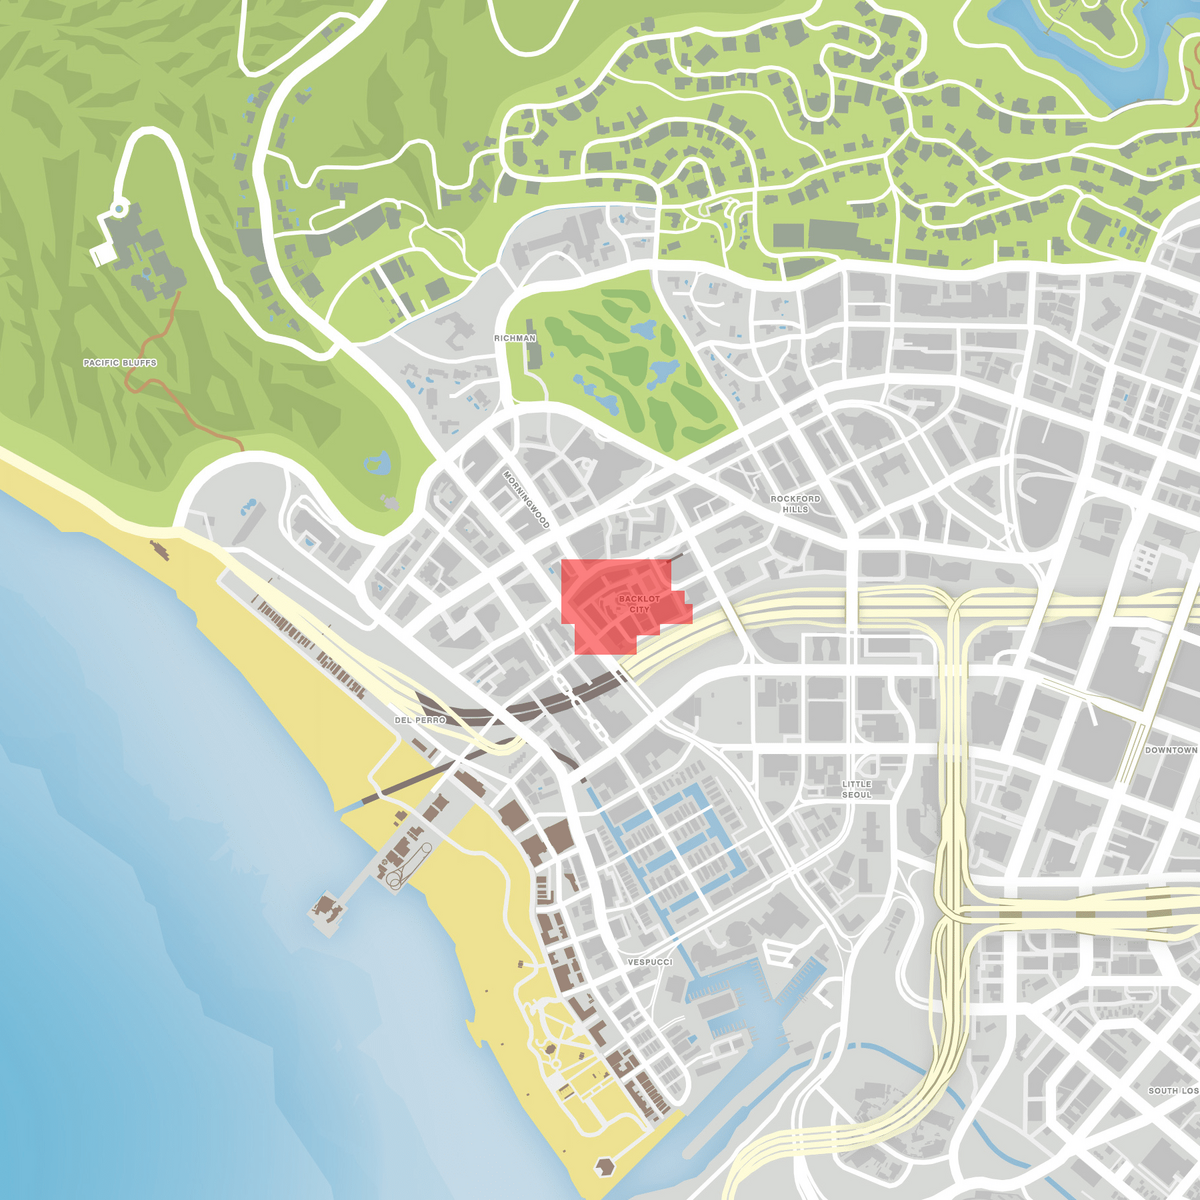 GTA 6 Evidence-Based Map - Took a lot of creative liberties with